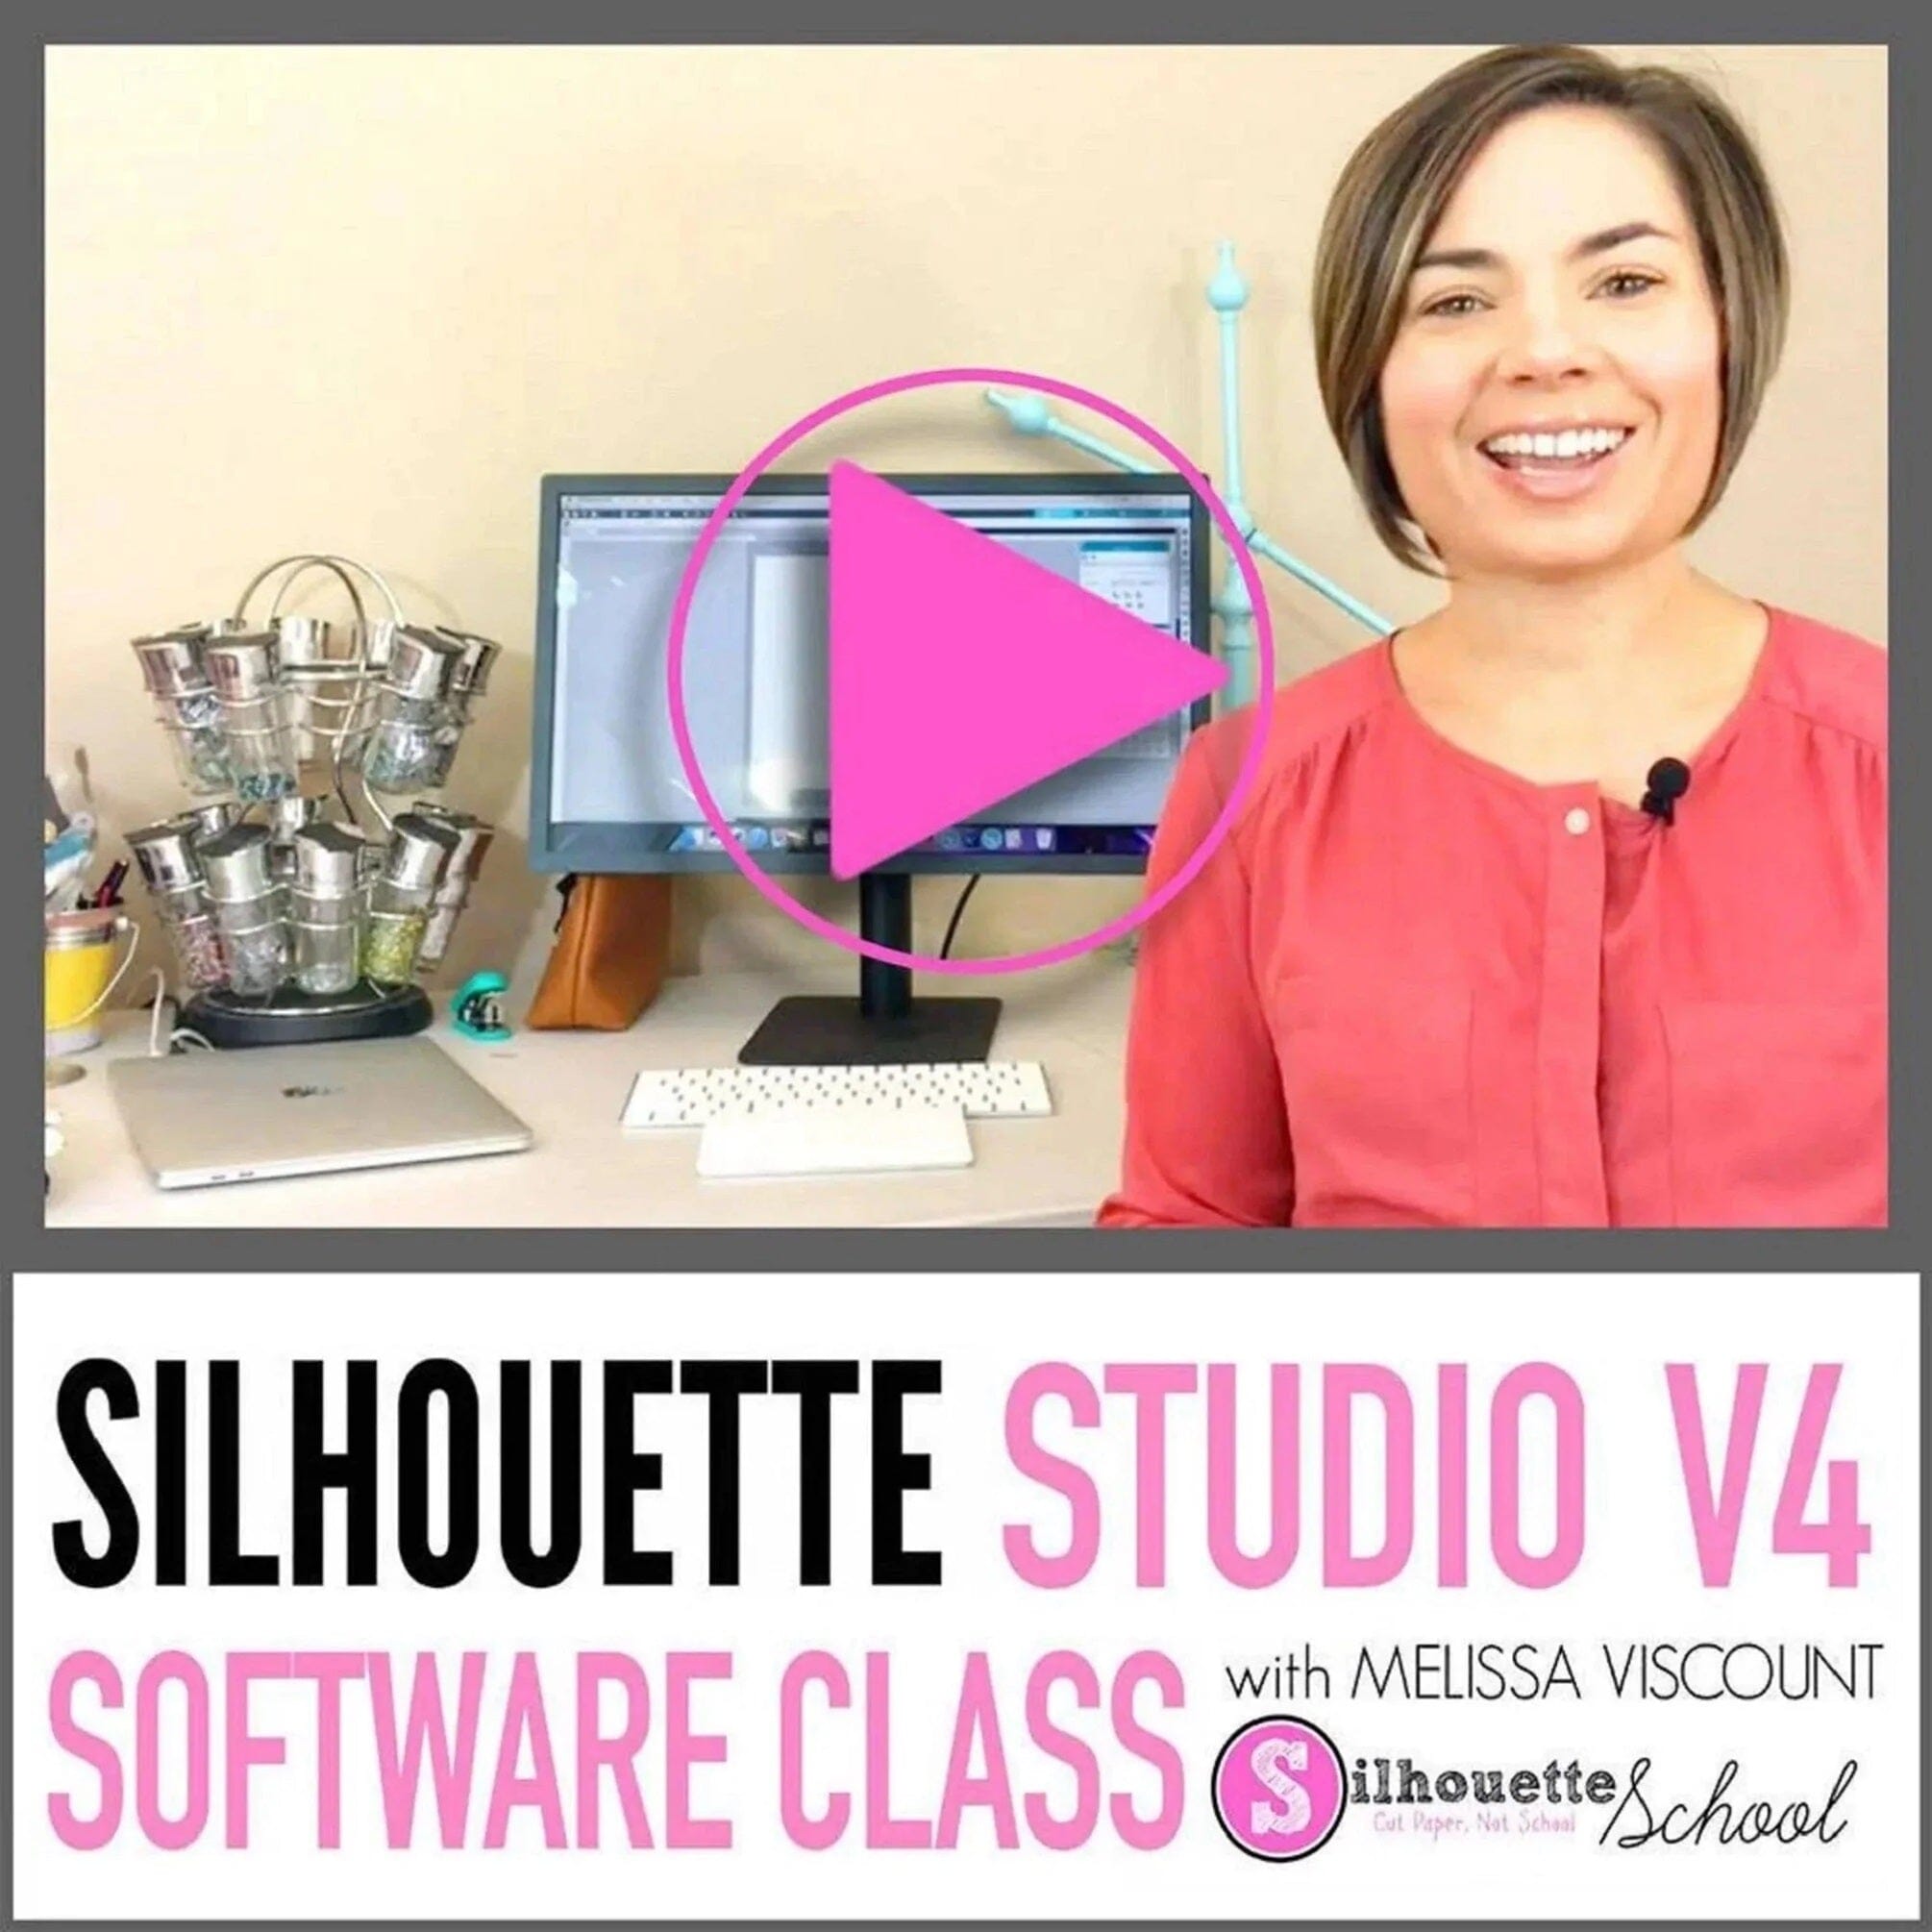 Silhouette School with Melissa Viscount